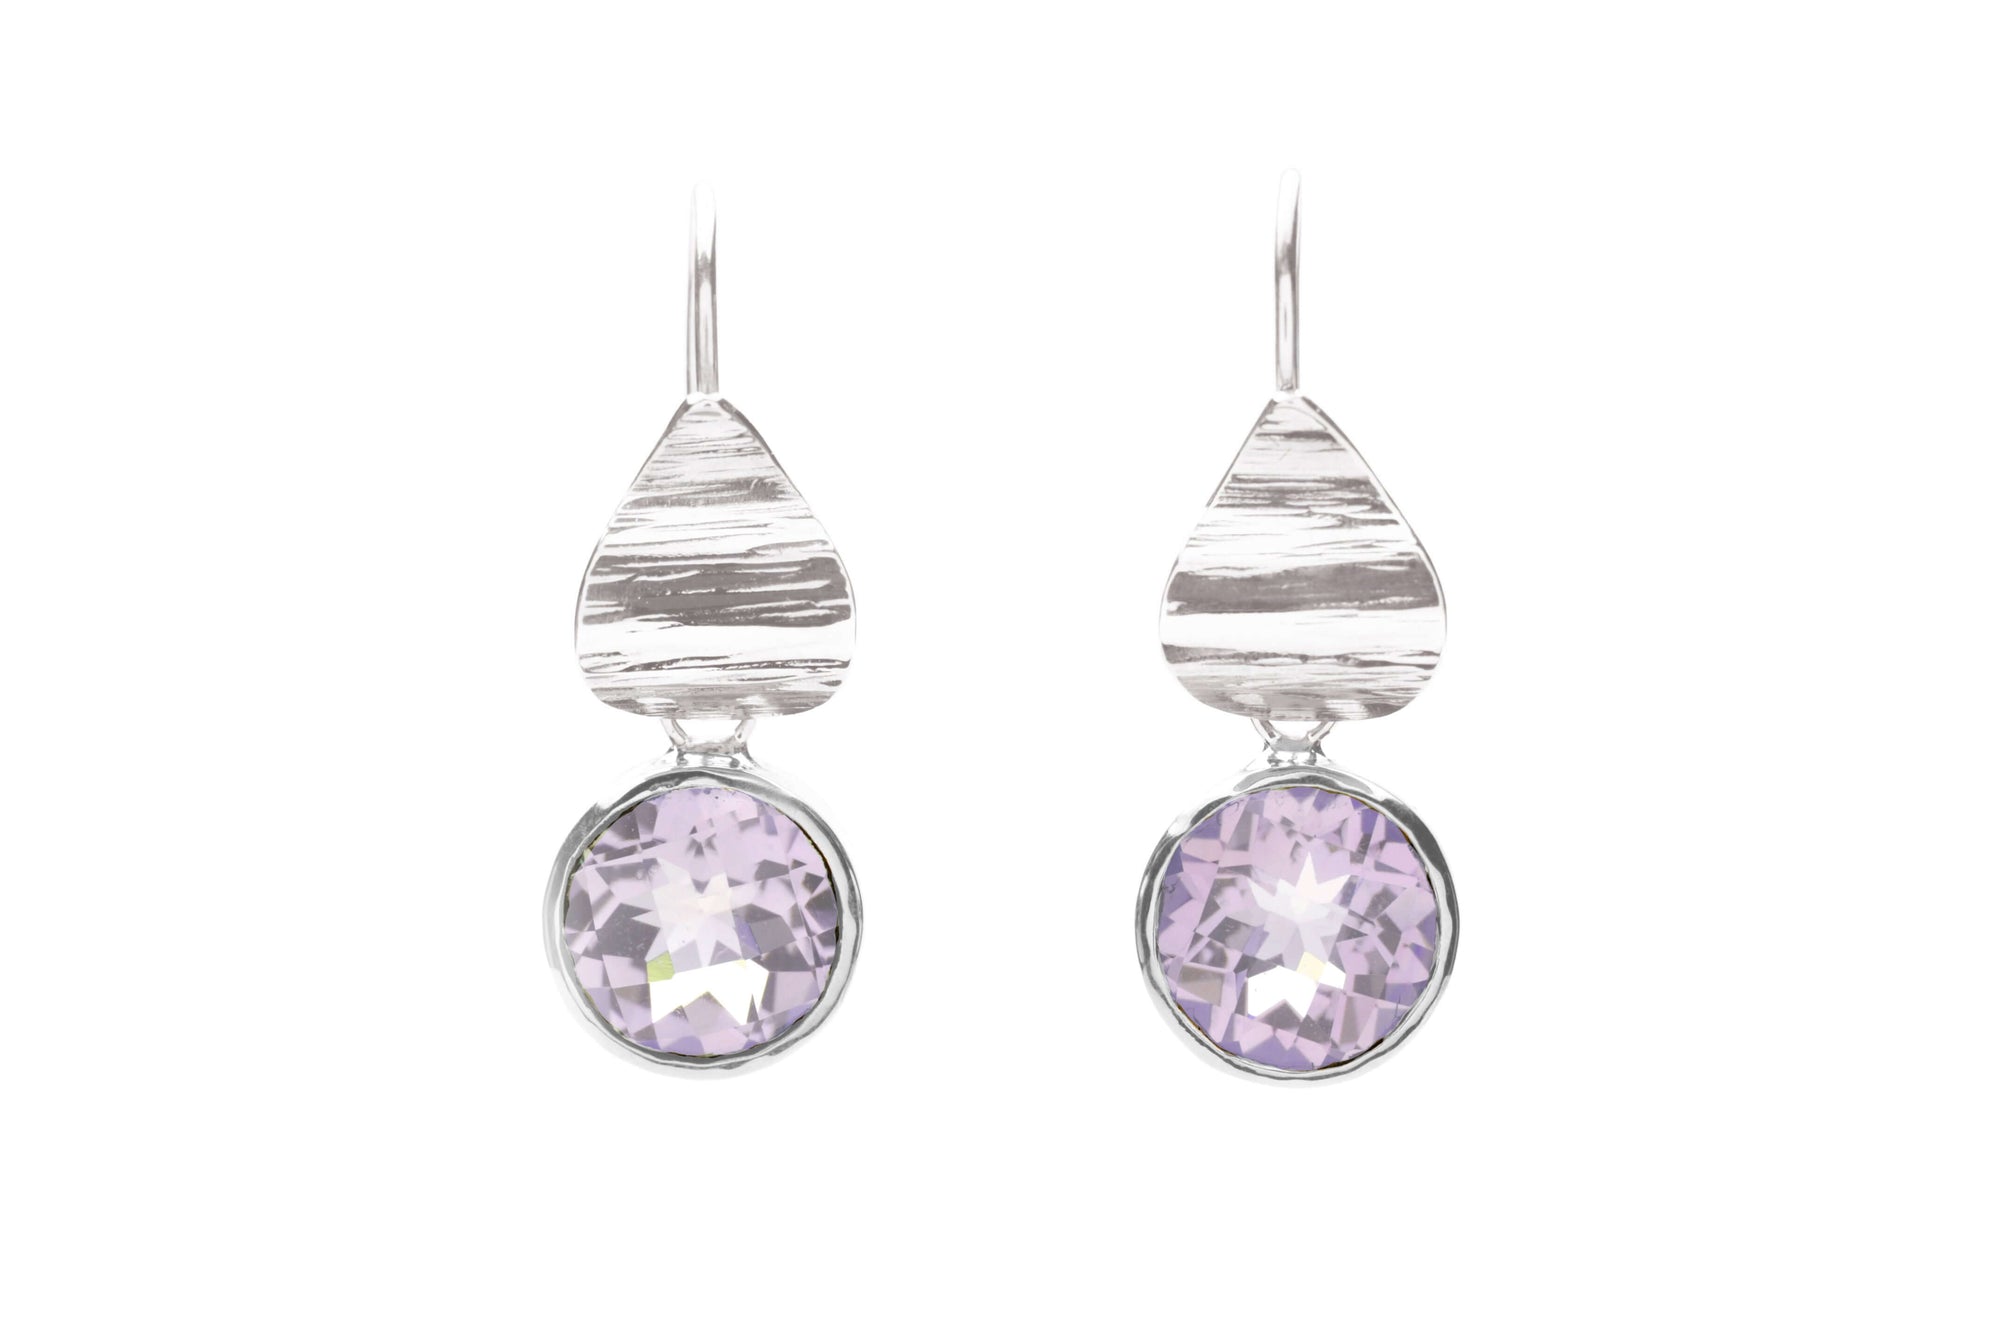 A pair of pink amethyst earrings, silver hooks included